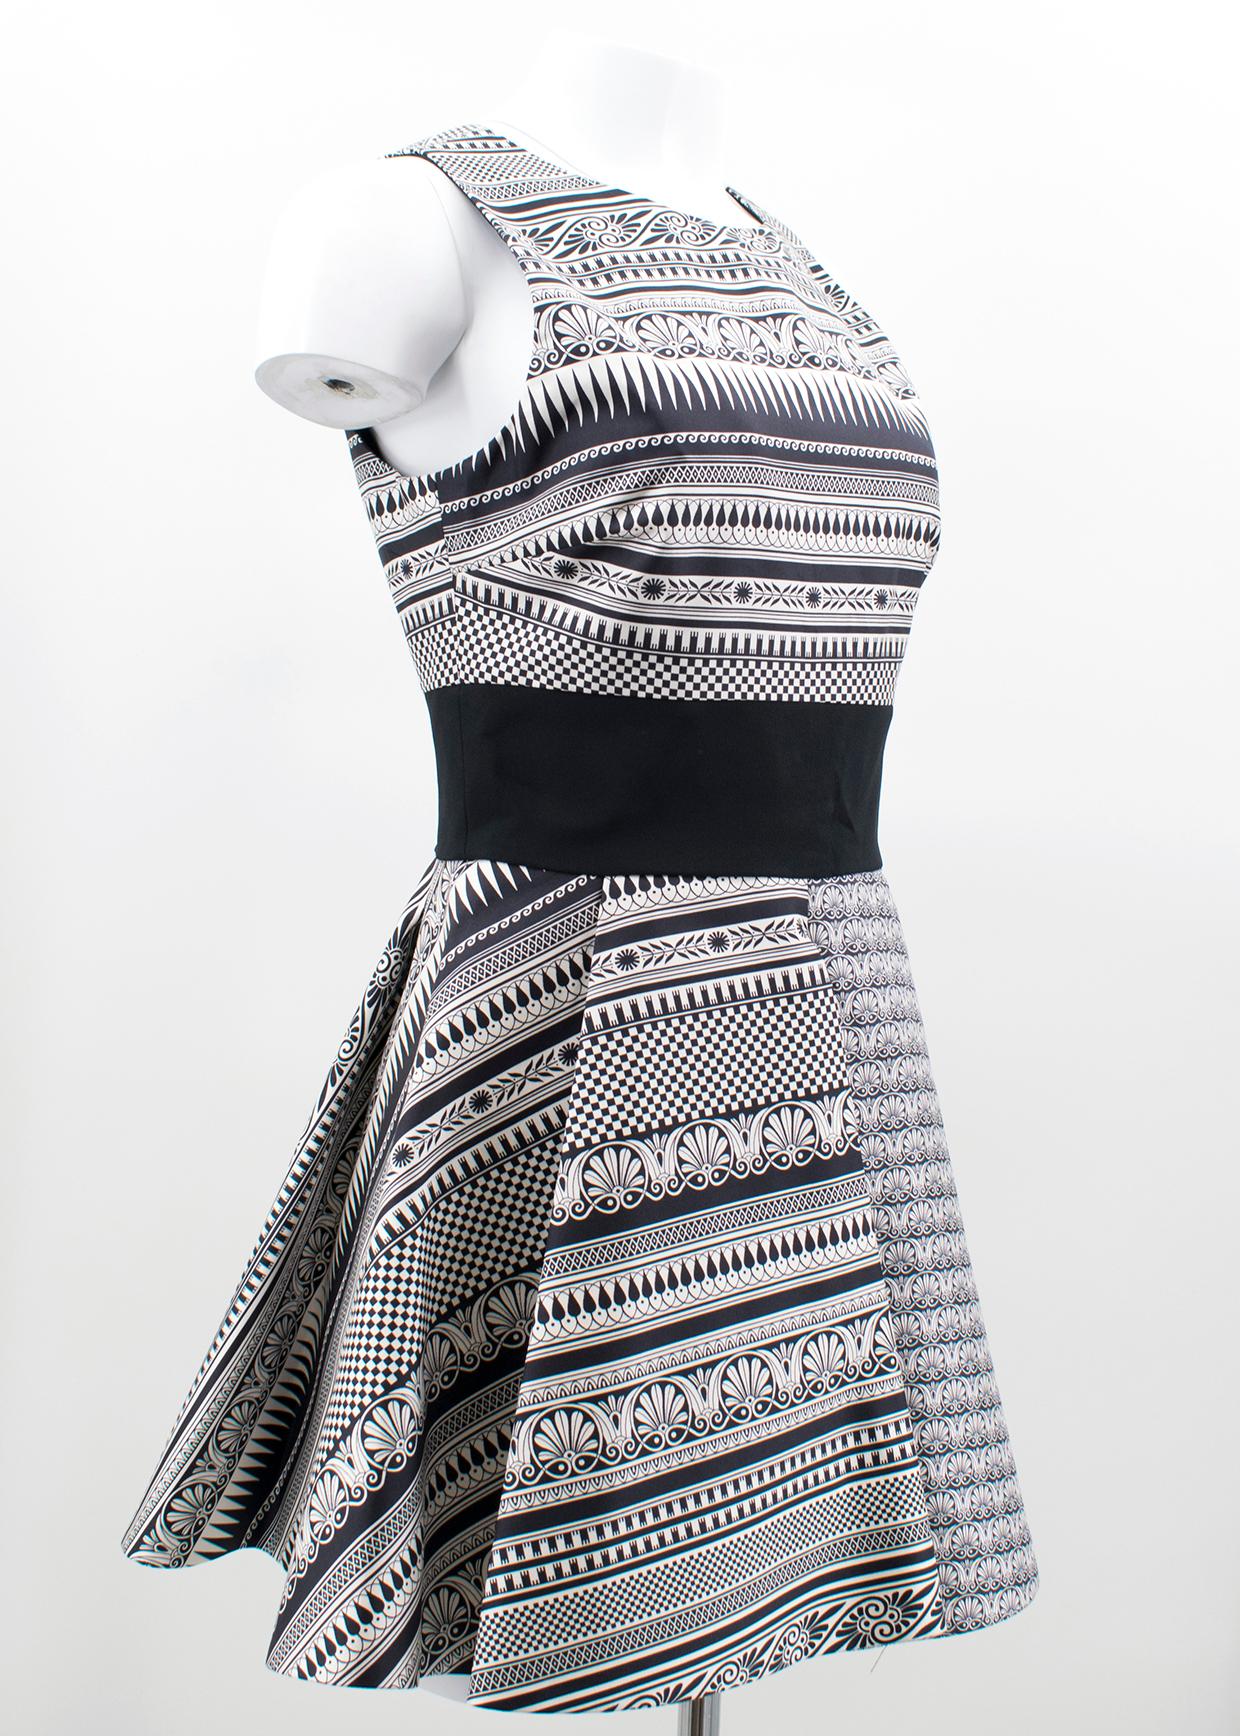 Fausto Puglisi Greek Inspired A-line Sleeveless Dress with full skirt and black waistband. 

Fabric: 100% Silk

Please note, these items are pre-owned and may show signs of being stored even when unworn and unused. This is reflected within the